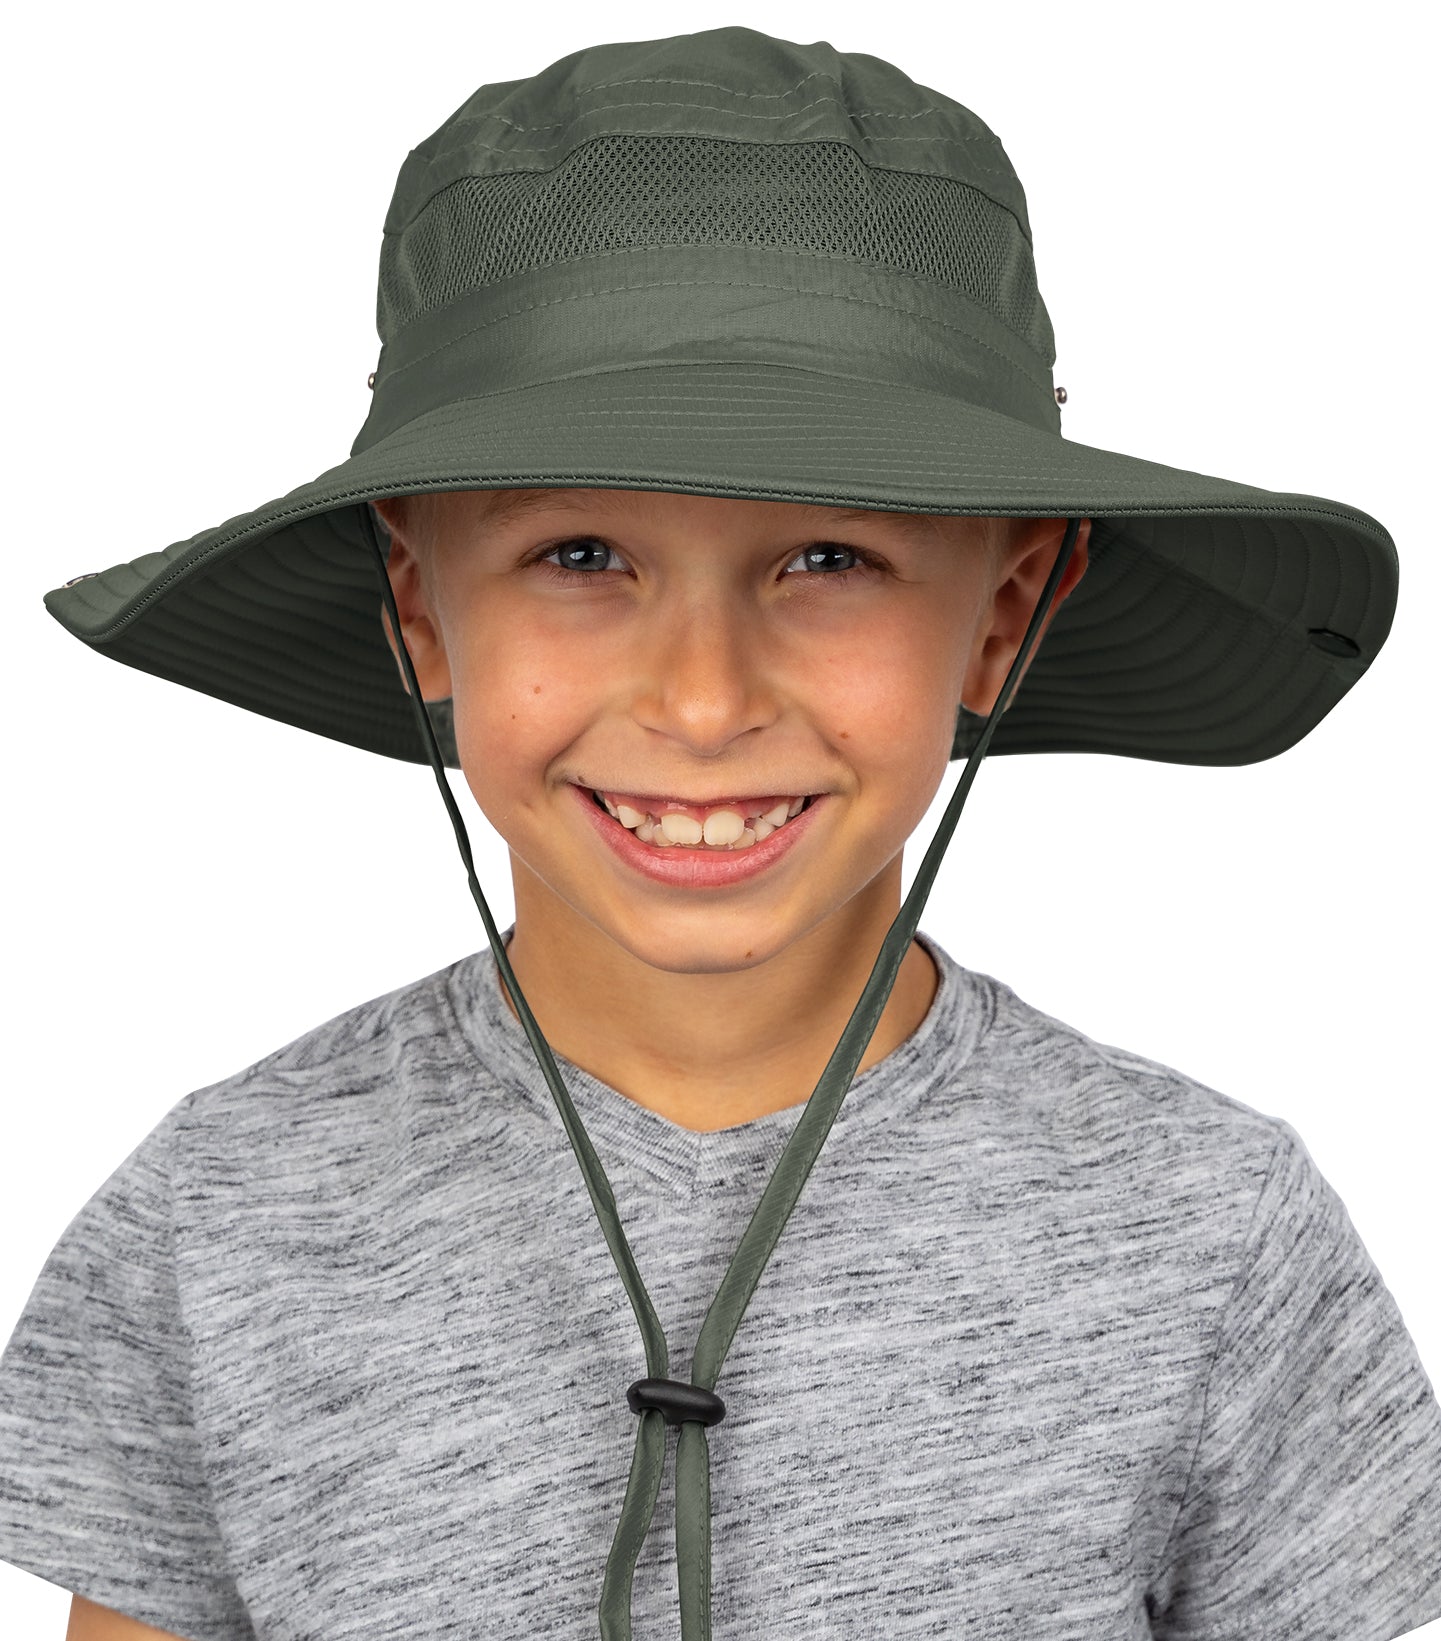 Sun Protection Hat for Kids with UPF 50+ - Safety Headgear - Discoverer  Series